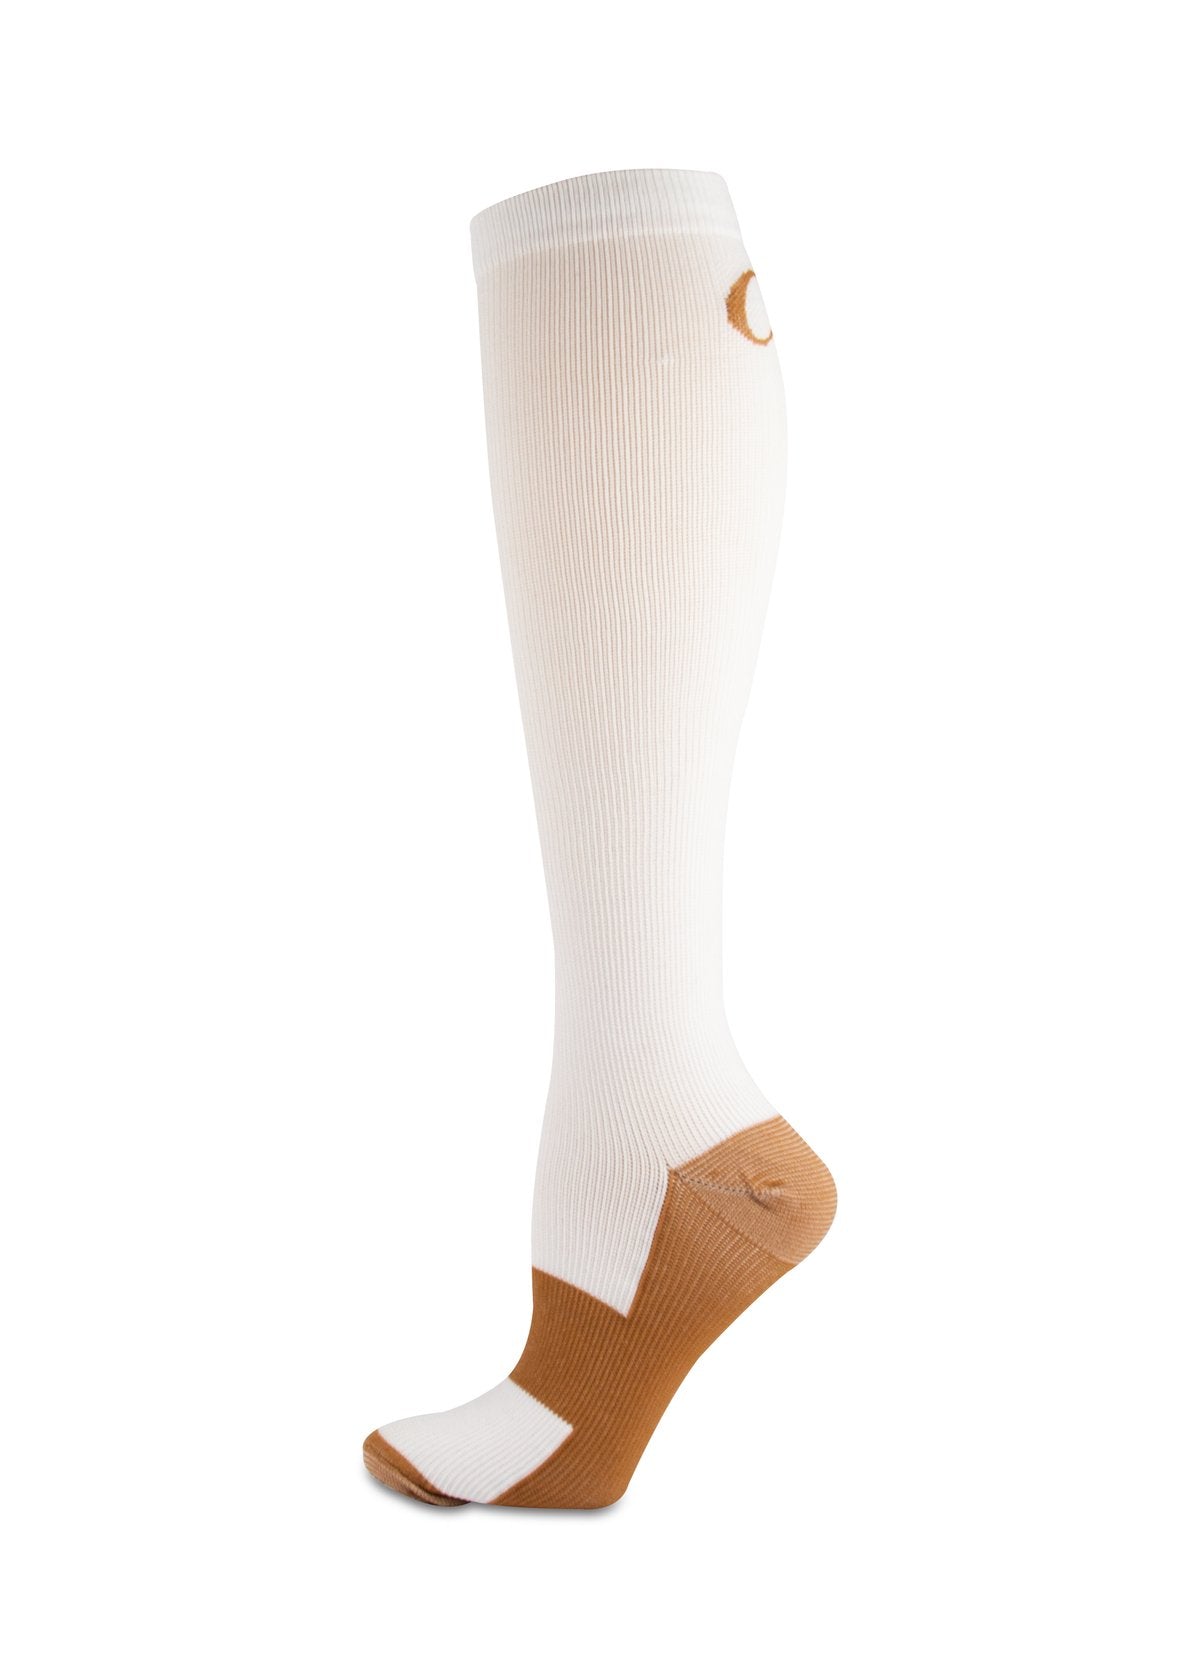 Alpha - Copper Infused Compression Socks – Alpha Sole